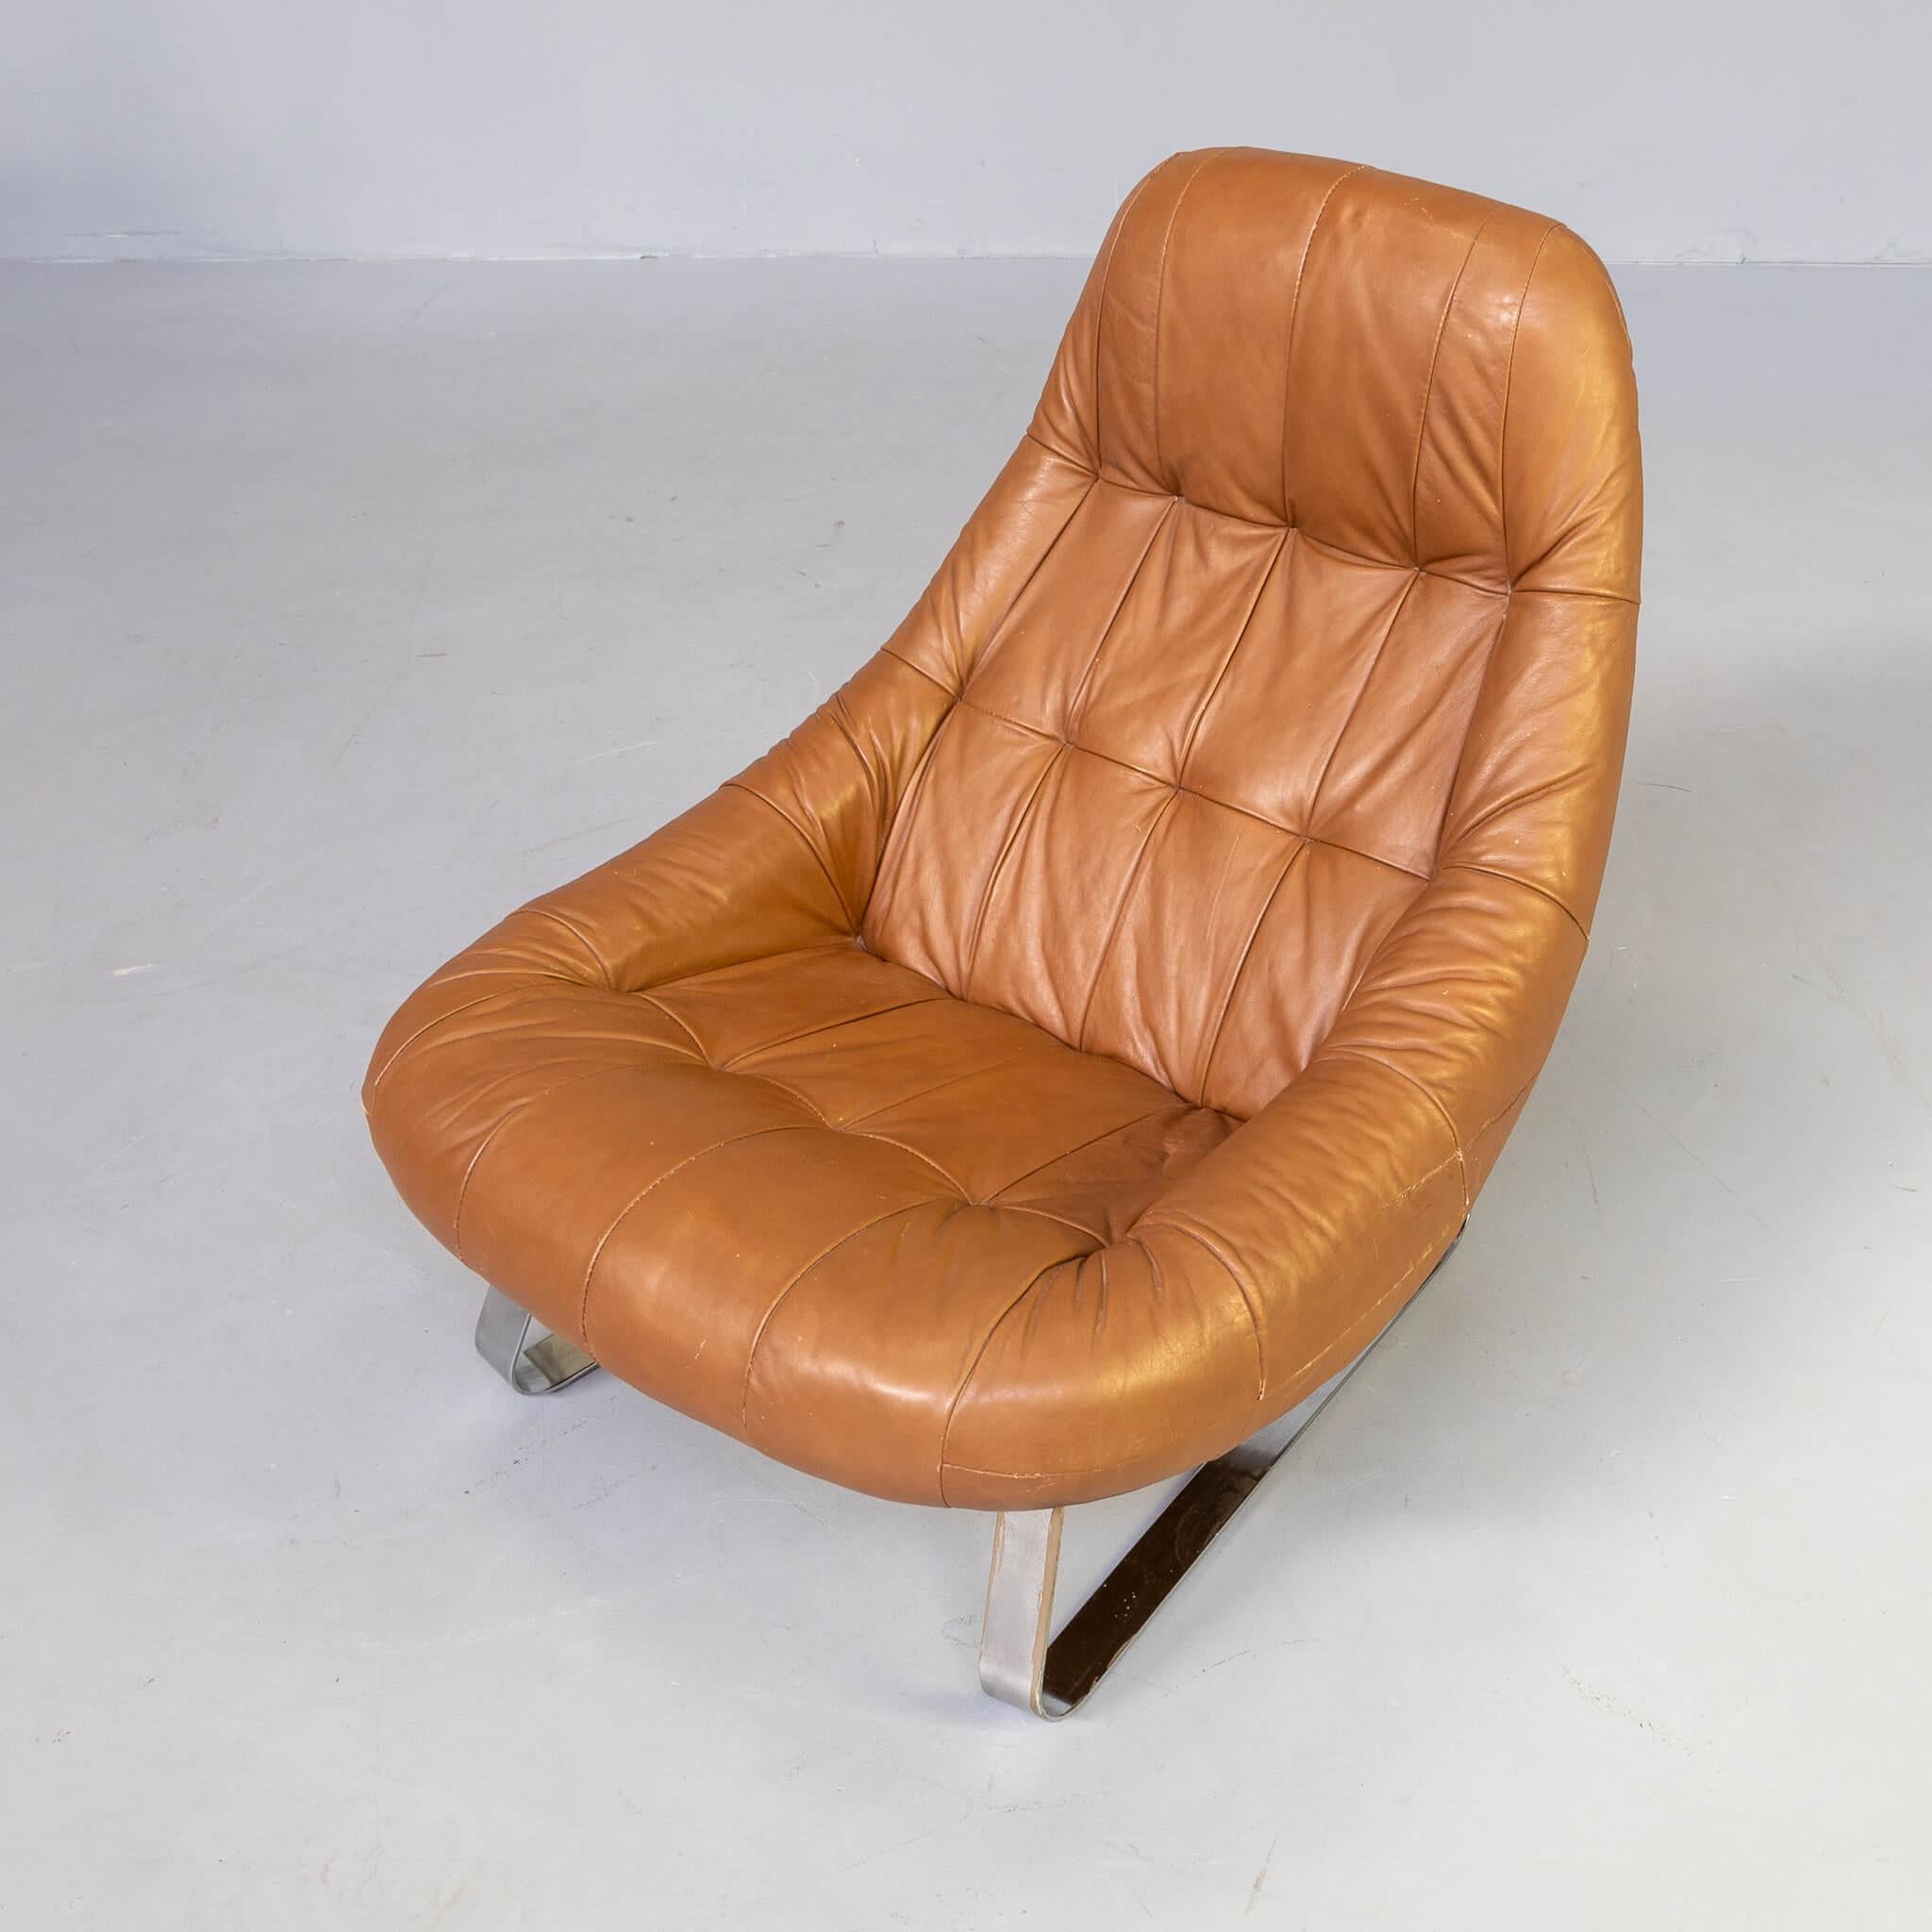 70s Percival Lafer “Earth Chair” Collection Lounge Fauteuil and Hocker In Good Condition For Sale In Amstelveen, Noord